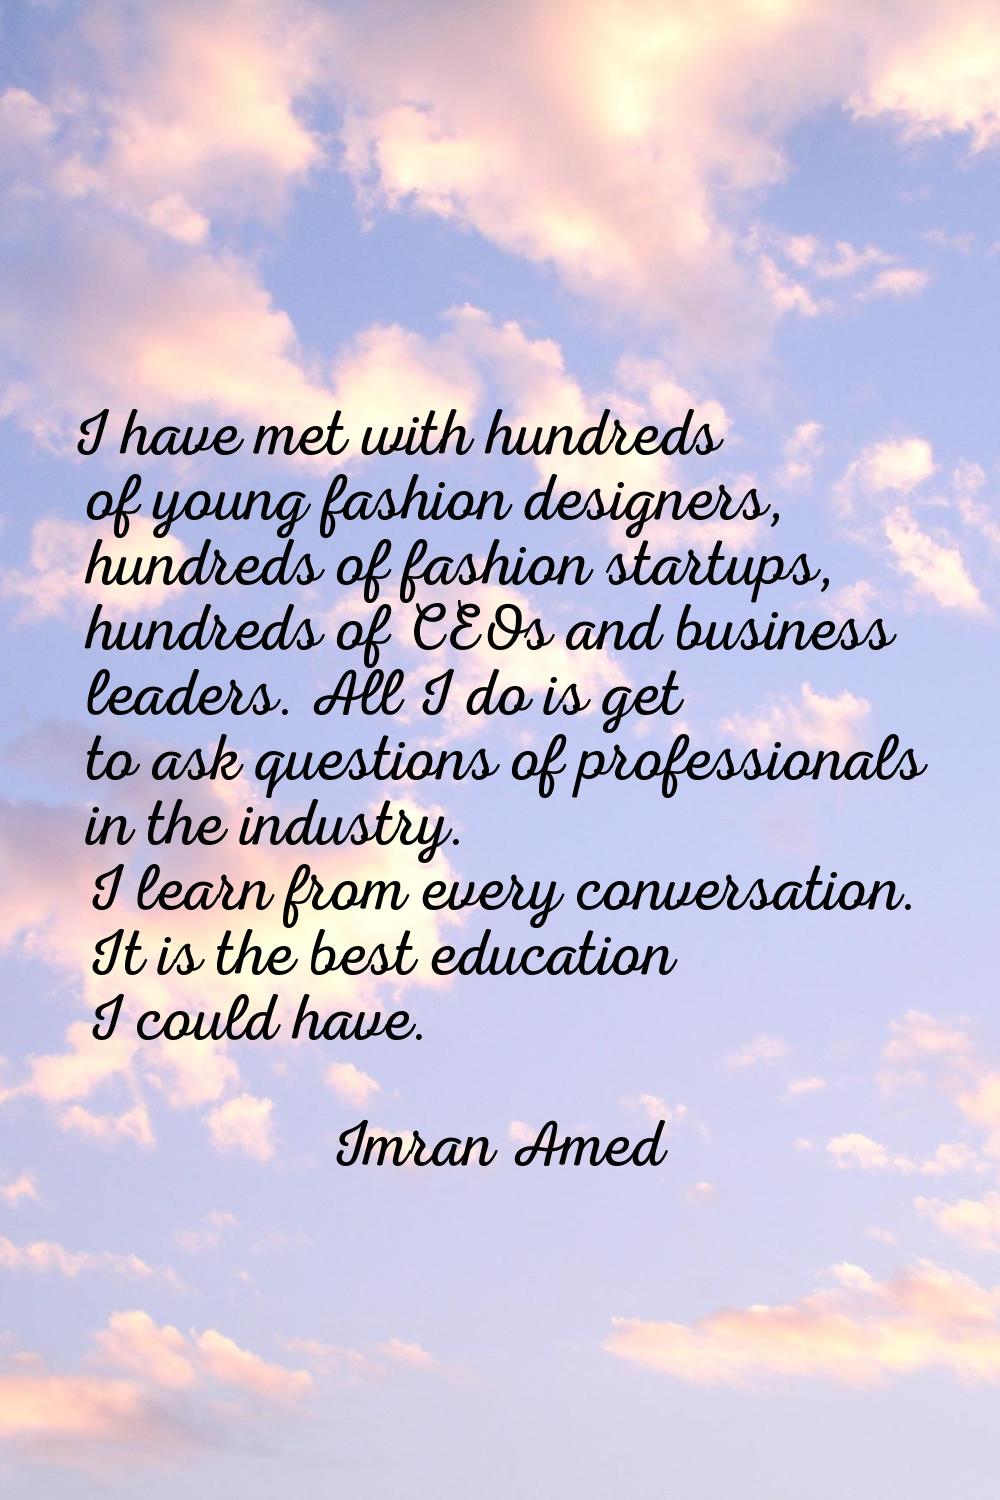 I have met with hundreds of young fashion designers, hundreds of fashion startups, hundreds of CEOs